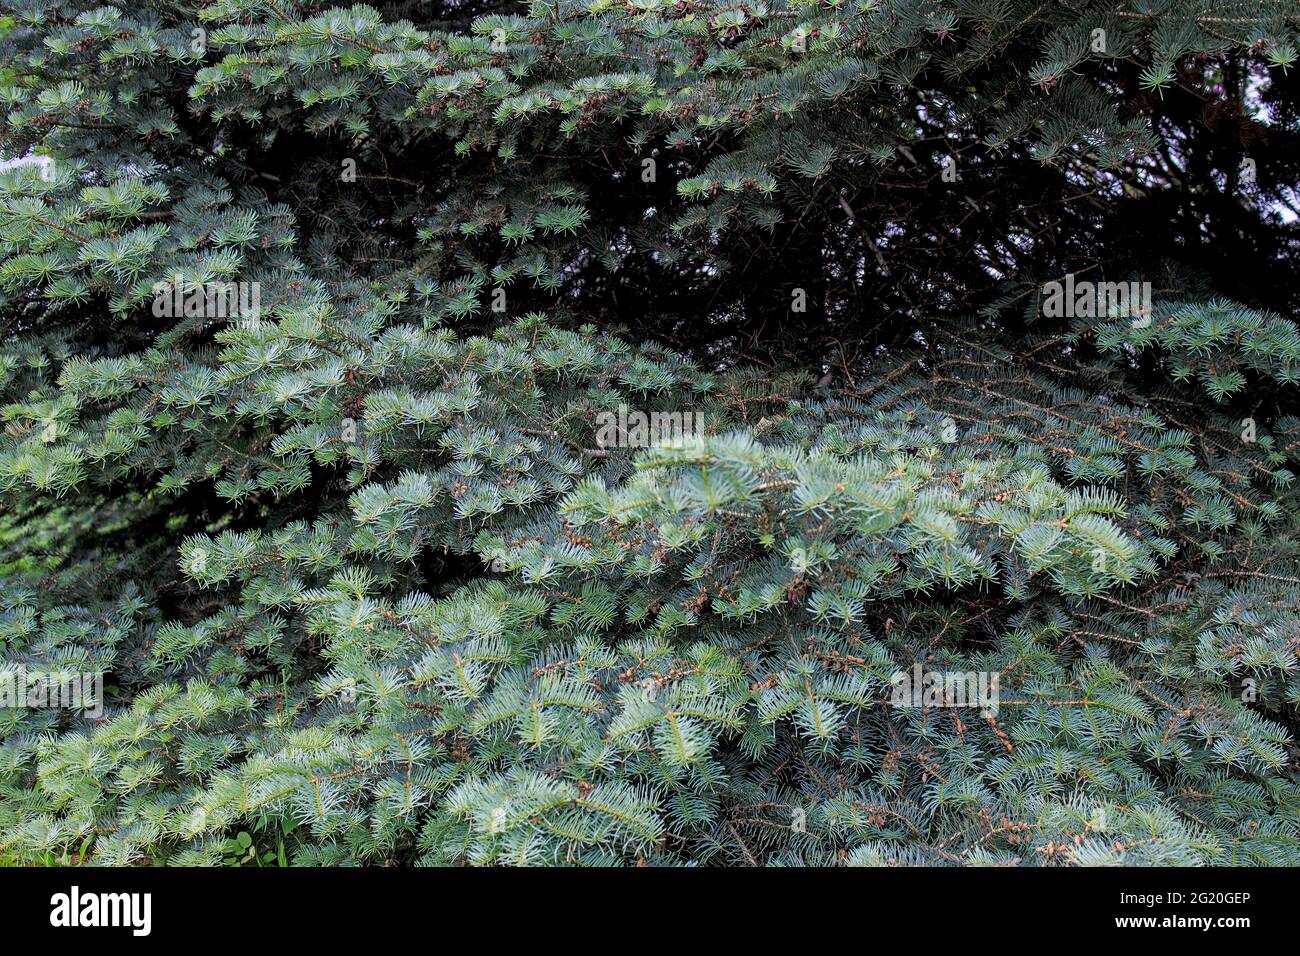 The blue spruce, also commonly known as green, white, Colorado, or Colorado blue spruce, is a species of spruce tree. picea pungens. Green background Stock Photo